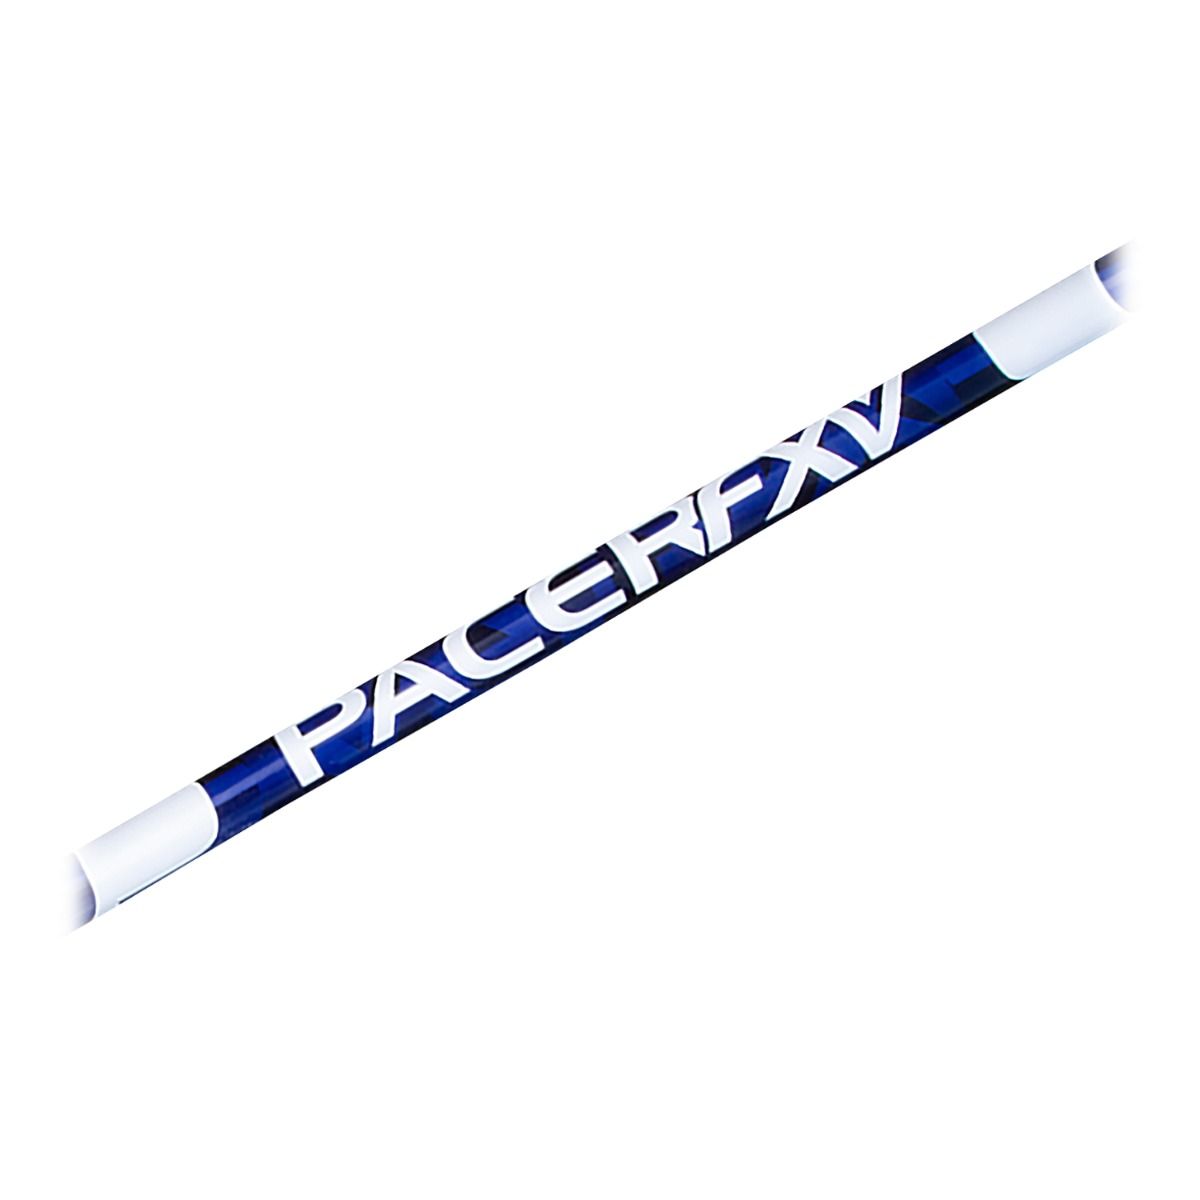 Gill PacerFXV 15' 6" Vaulting Pole